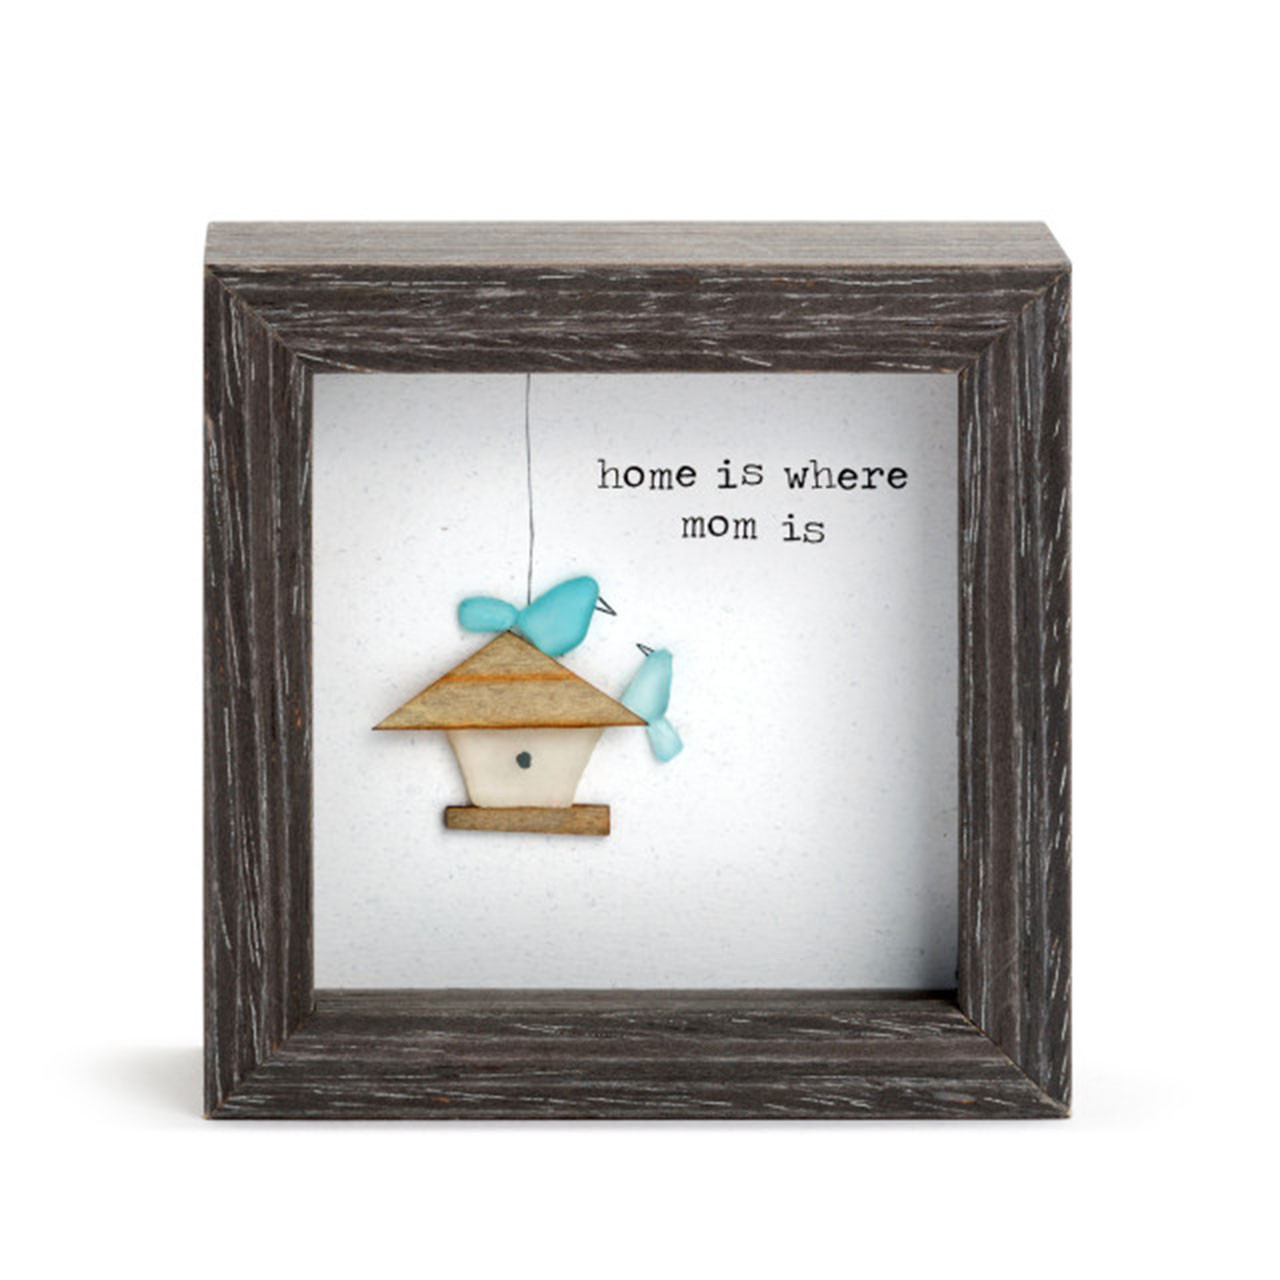 4" square Home Is Where Mom Is Mini Plaque